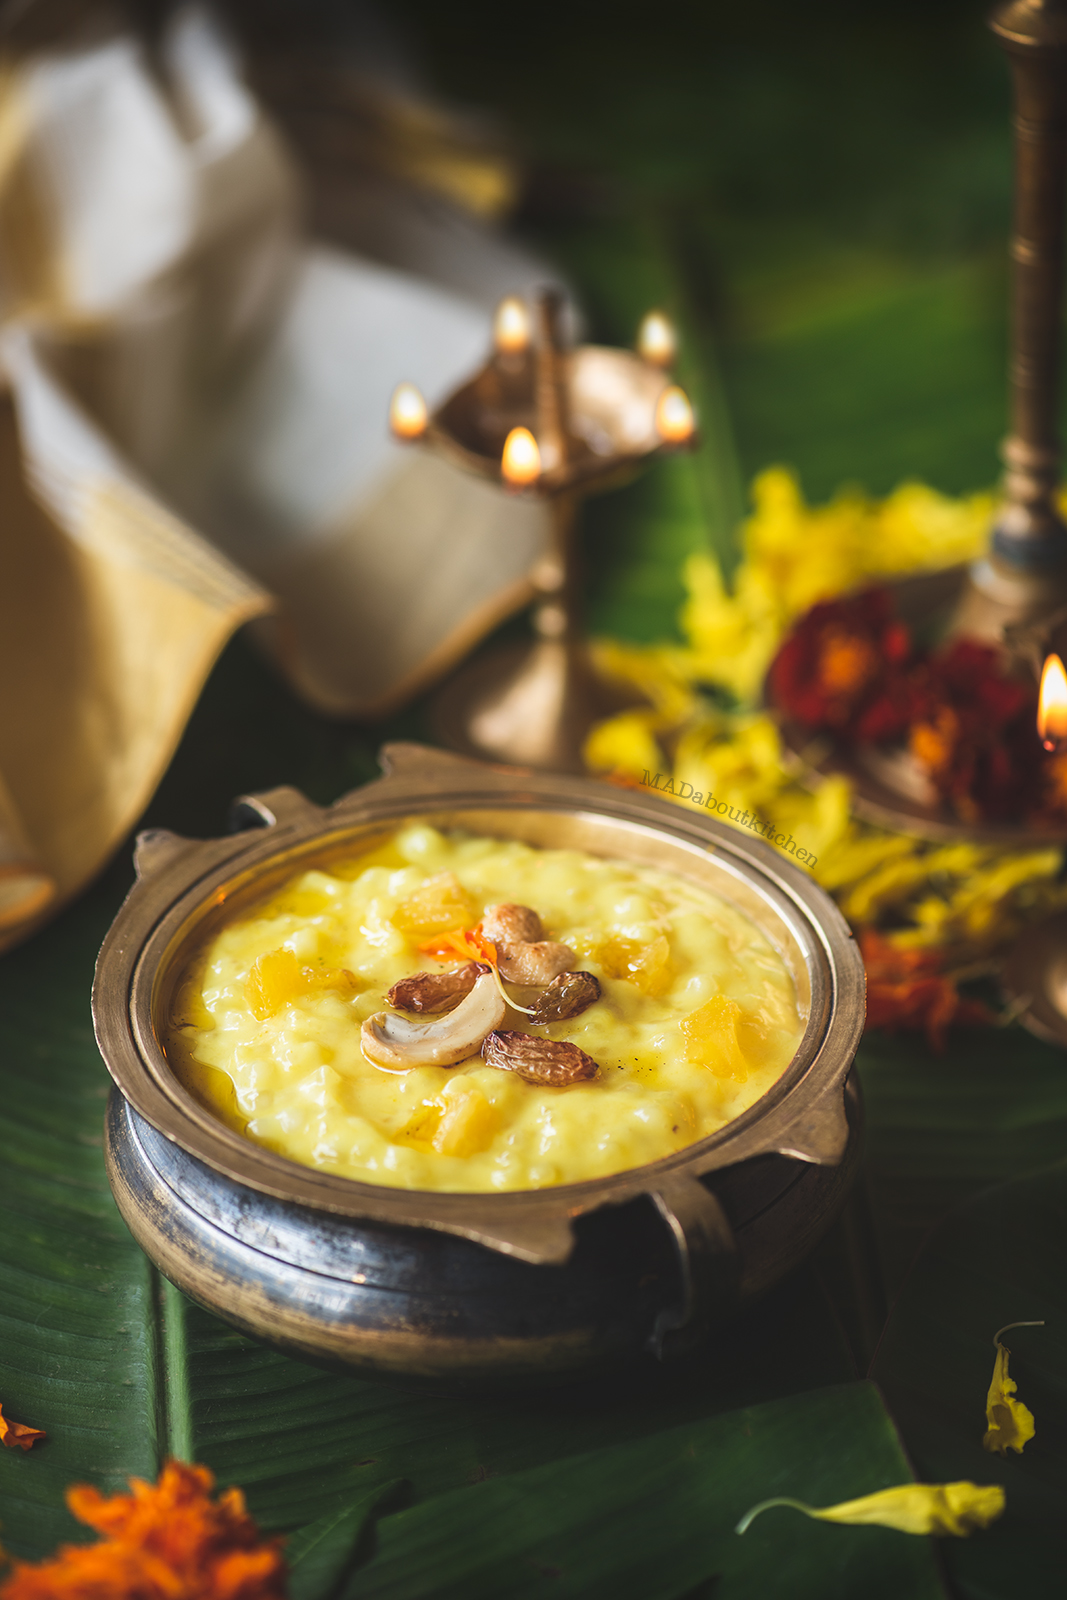 Pineapple payasam is a Kerala style Pineapple kheer specially made during Onam. Pineapple is cooked with Sago to make this creamy payasam.